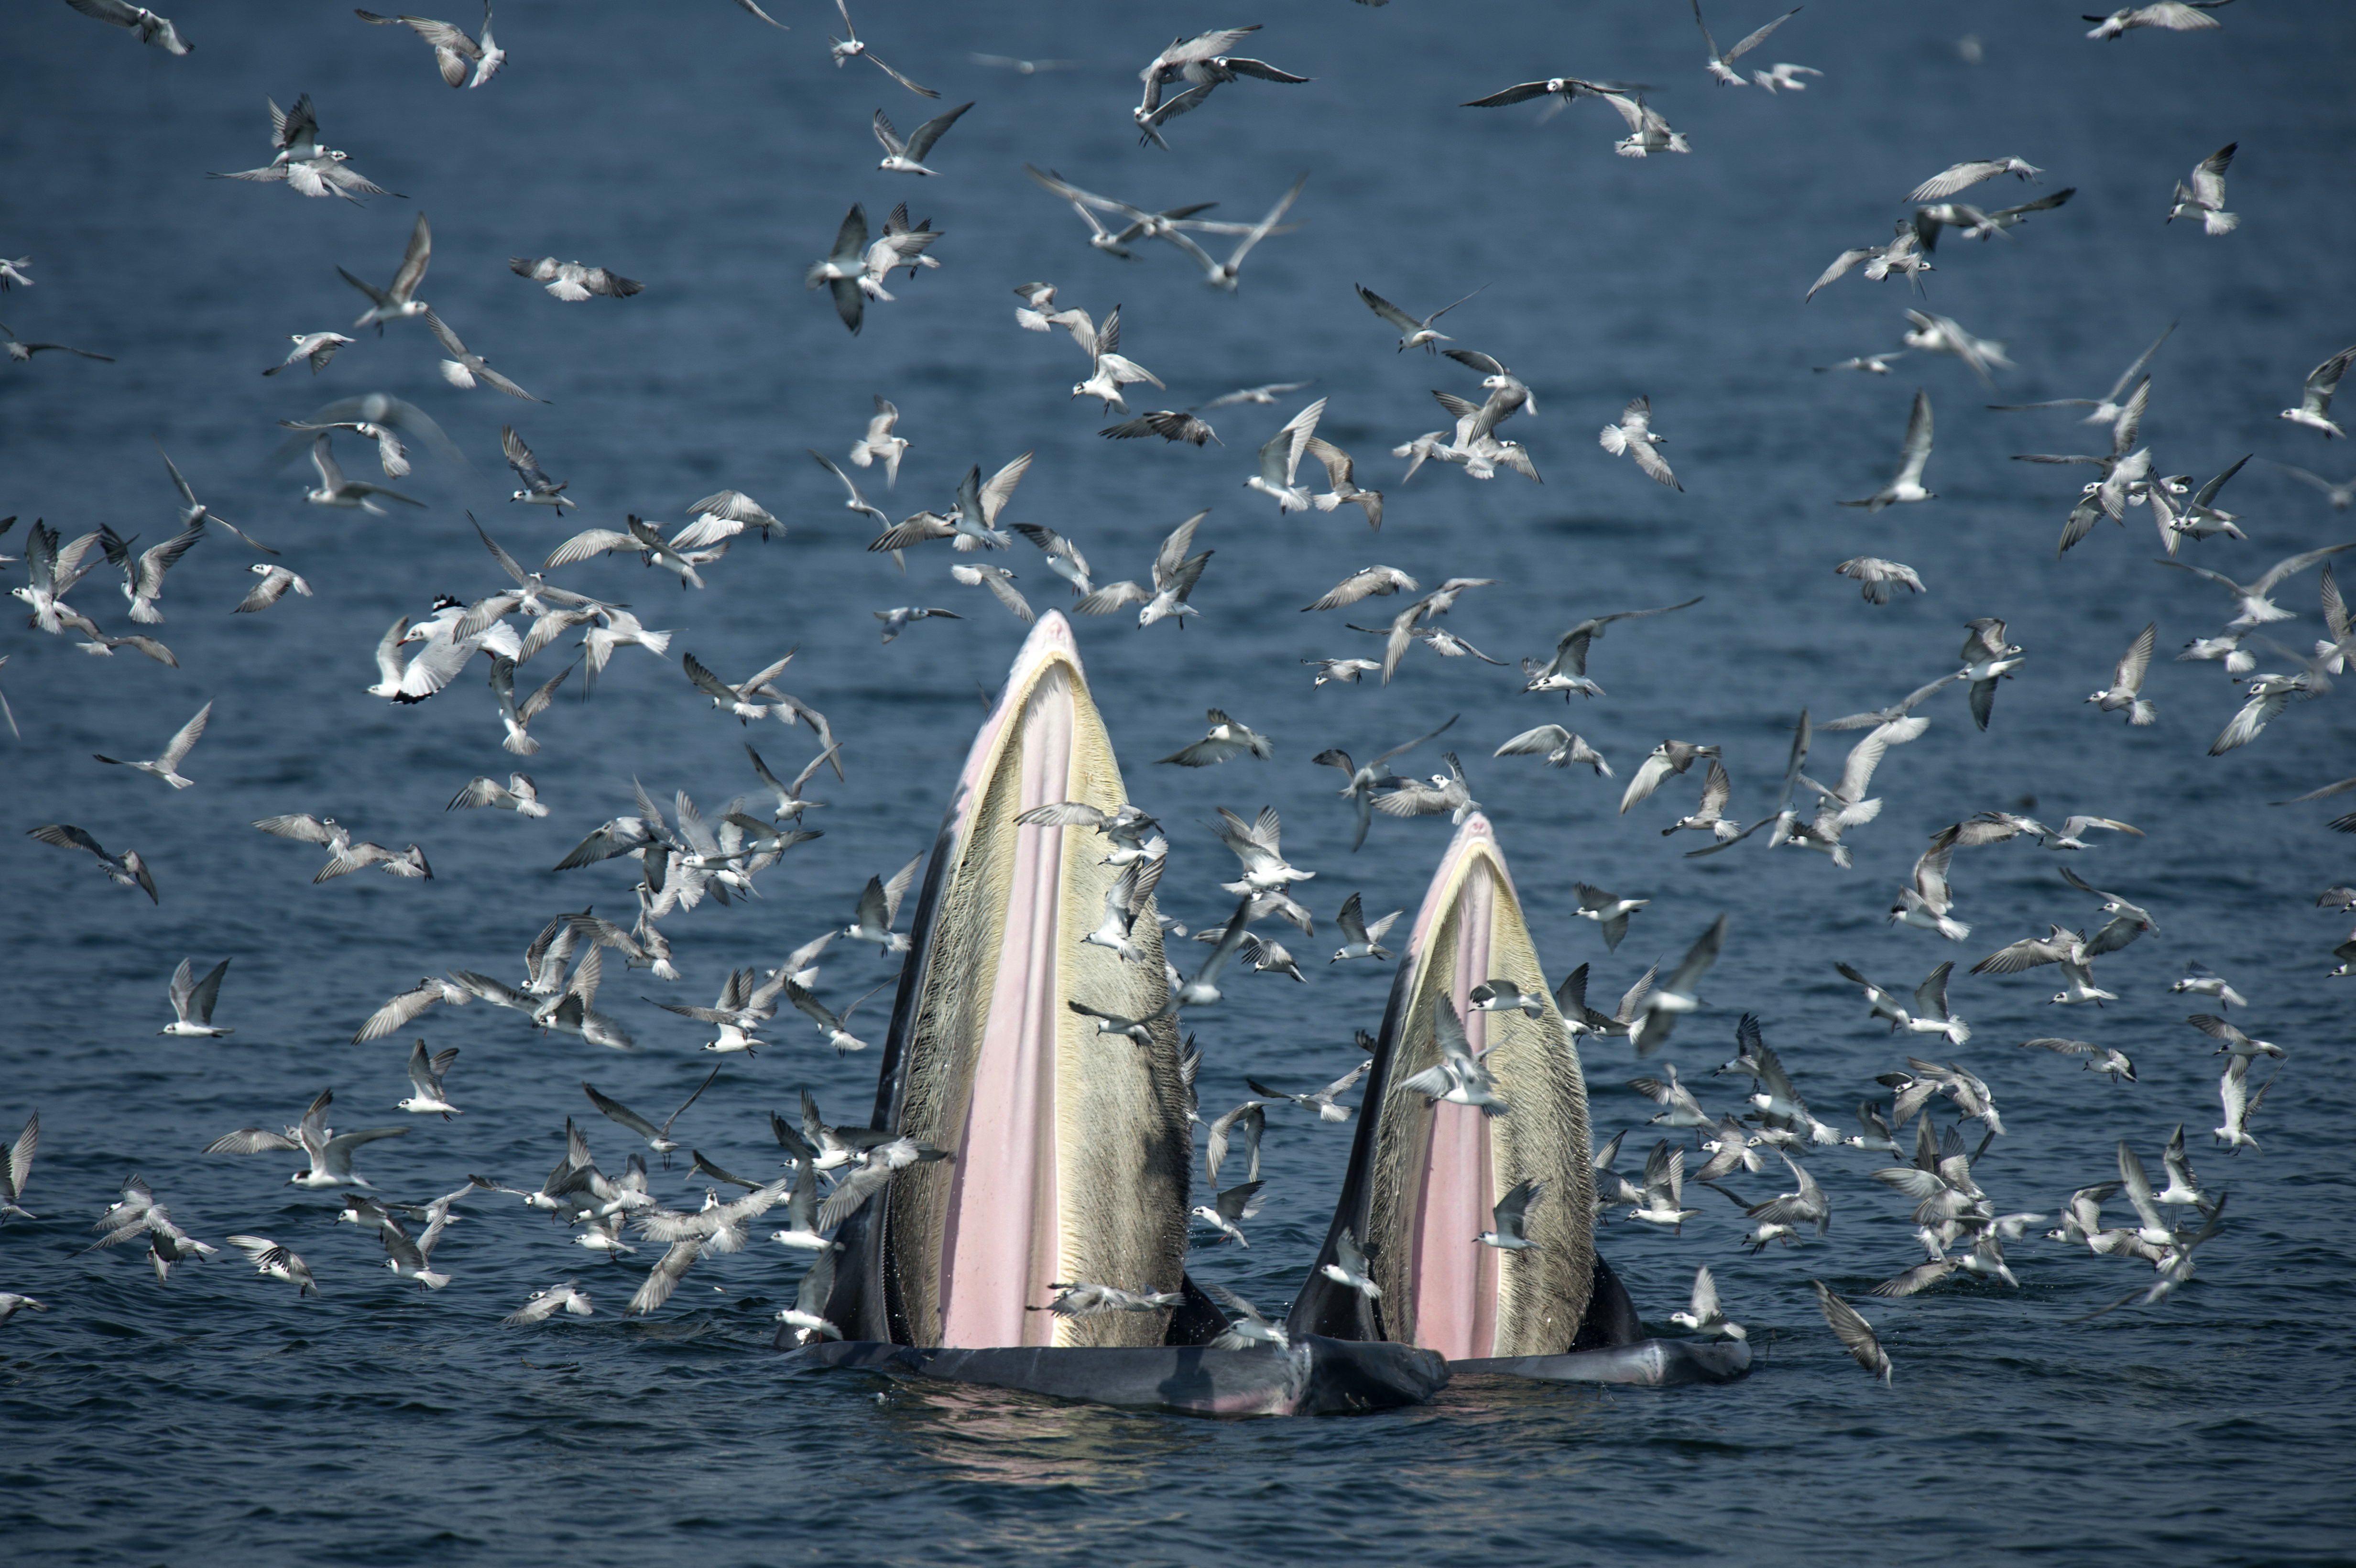 This picture taken on November 20, 2016 shows a mother Bryde's whale (L) and her calf feeding on anchovies in the Gulf of Thailand, off the coast of Samut Sakhon province. It's a rare glimpse of marine life in its natural habitat, in a kingdom overrun with mass tourist attractions such as aquariums and dolphin shows. Once a dream for scuba divers, many of Thailand's coral reefs have been dulled by pollution, over-fishing and increased boat traffic, as well as over-enthusiastic swimmers.  / AFP PHOTO / Lillian SUWANRUMPHA / TO GO WITH AFP STORY: "Thailand-Lifestyle-Whales-Tourism", FEATURE by Delphine THOUVENOT